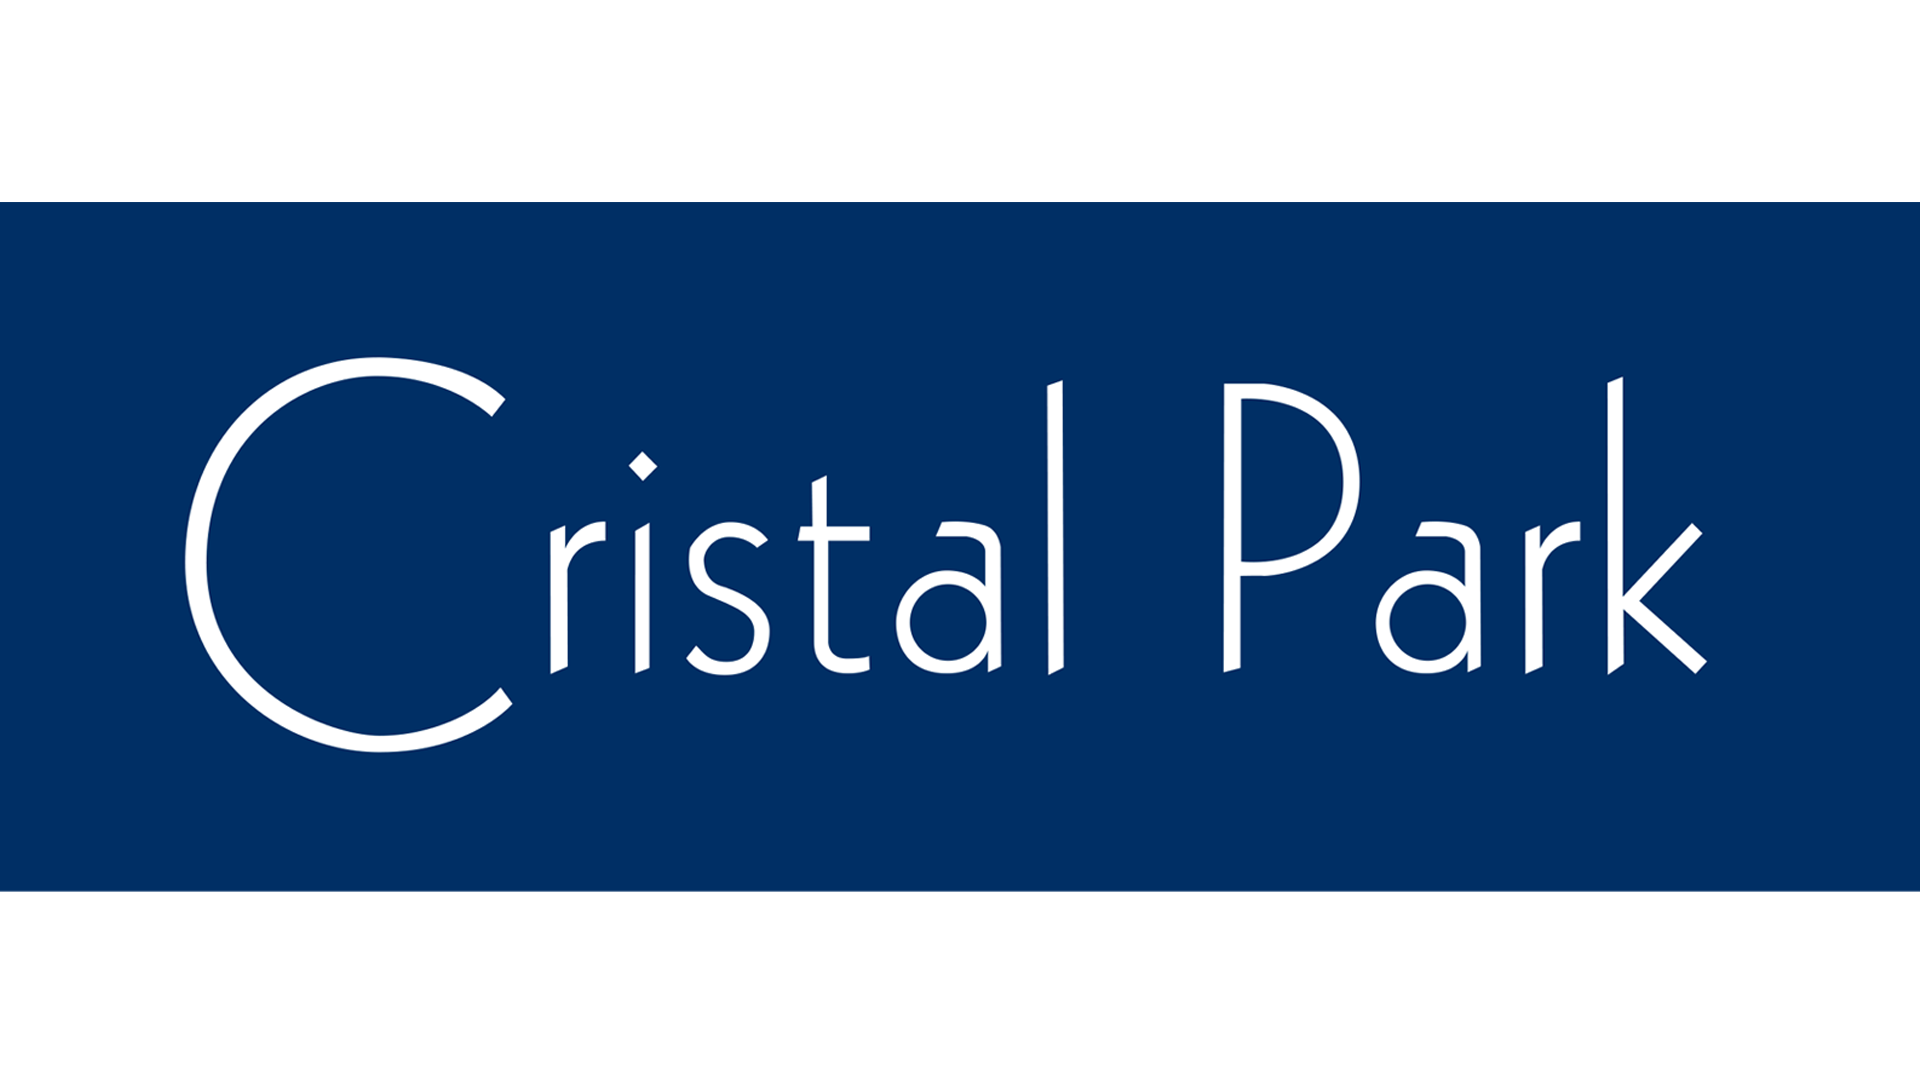 completed-projects/cristal-park